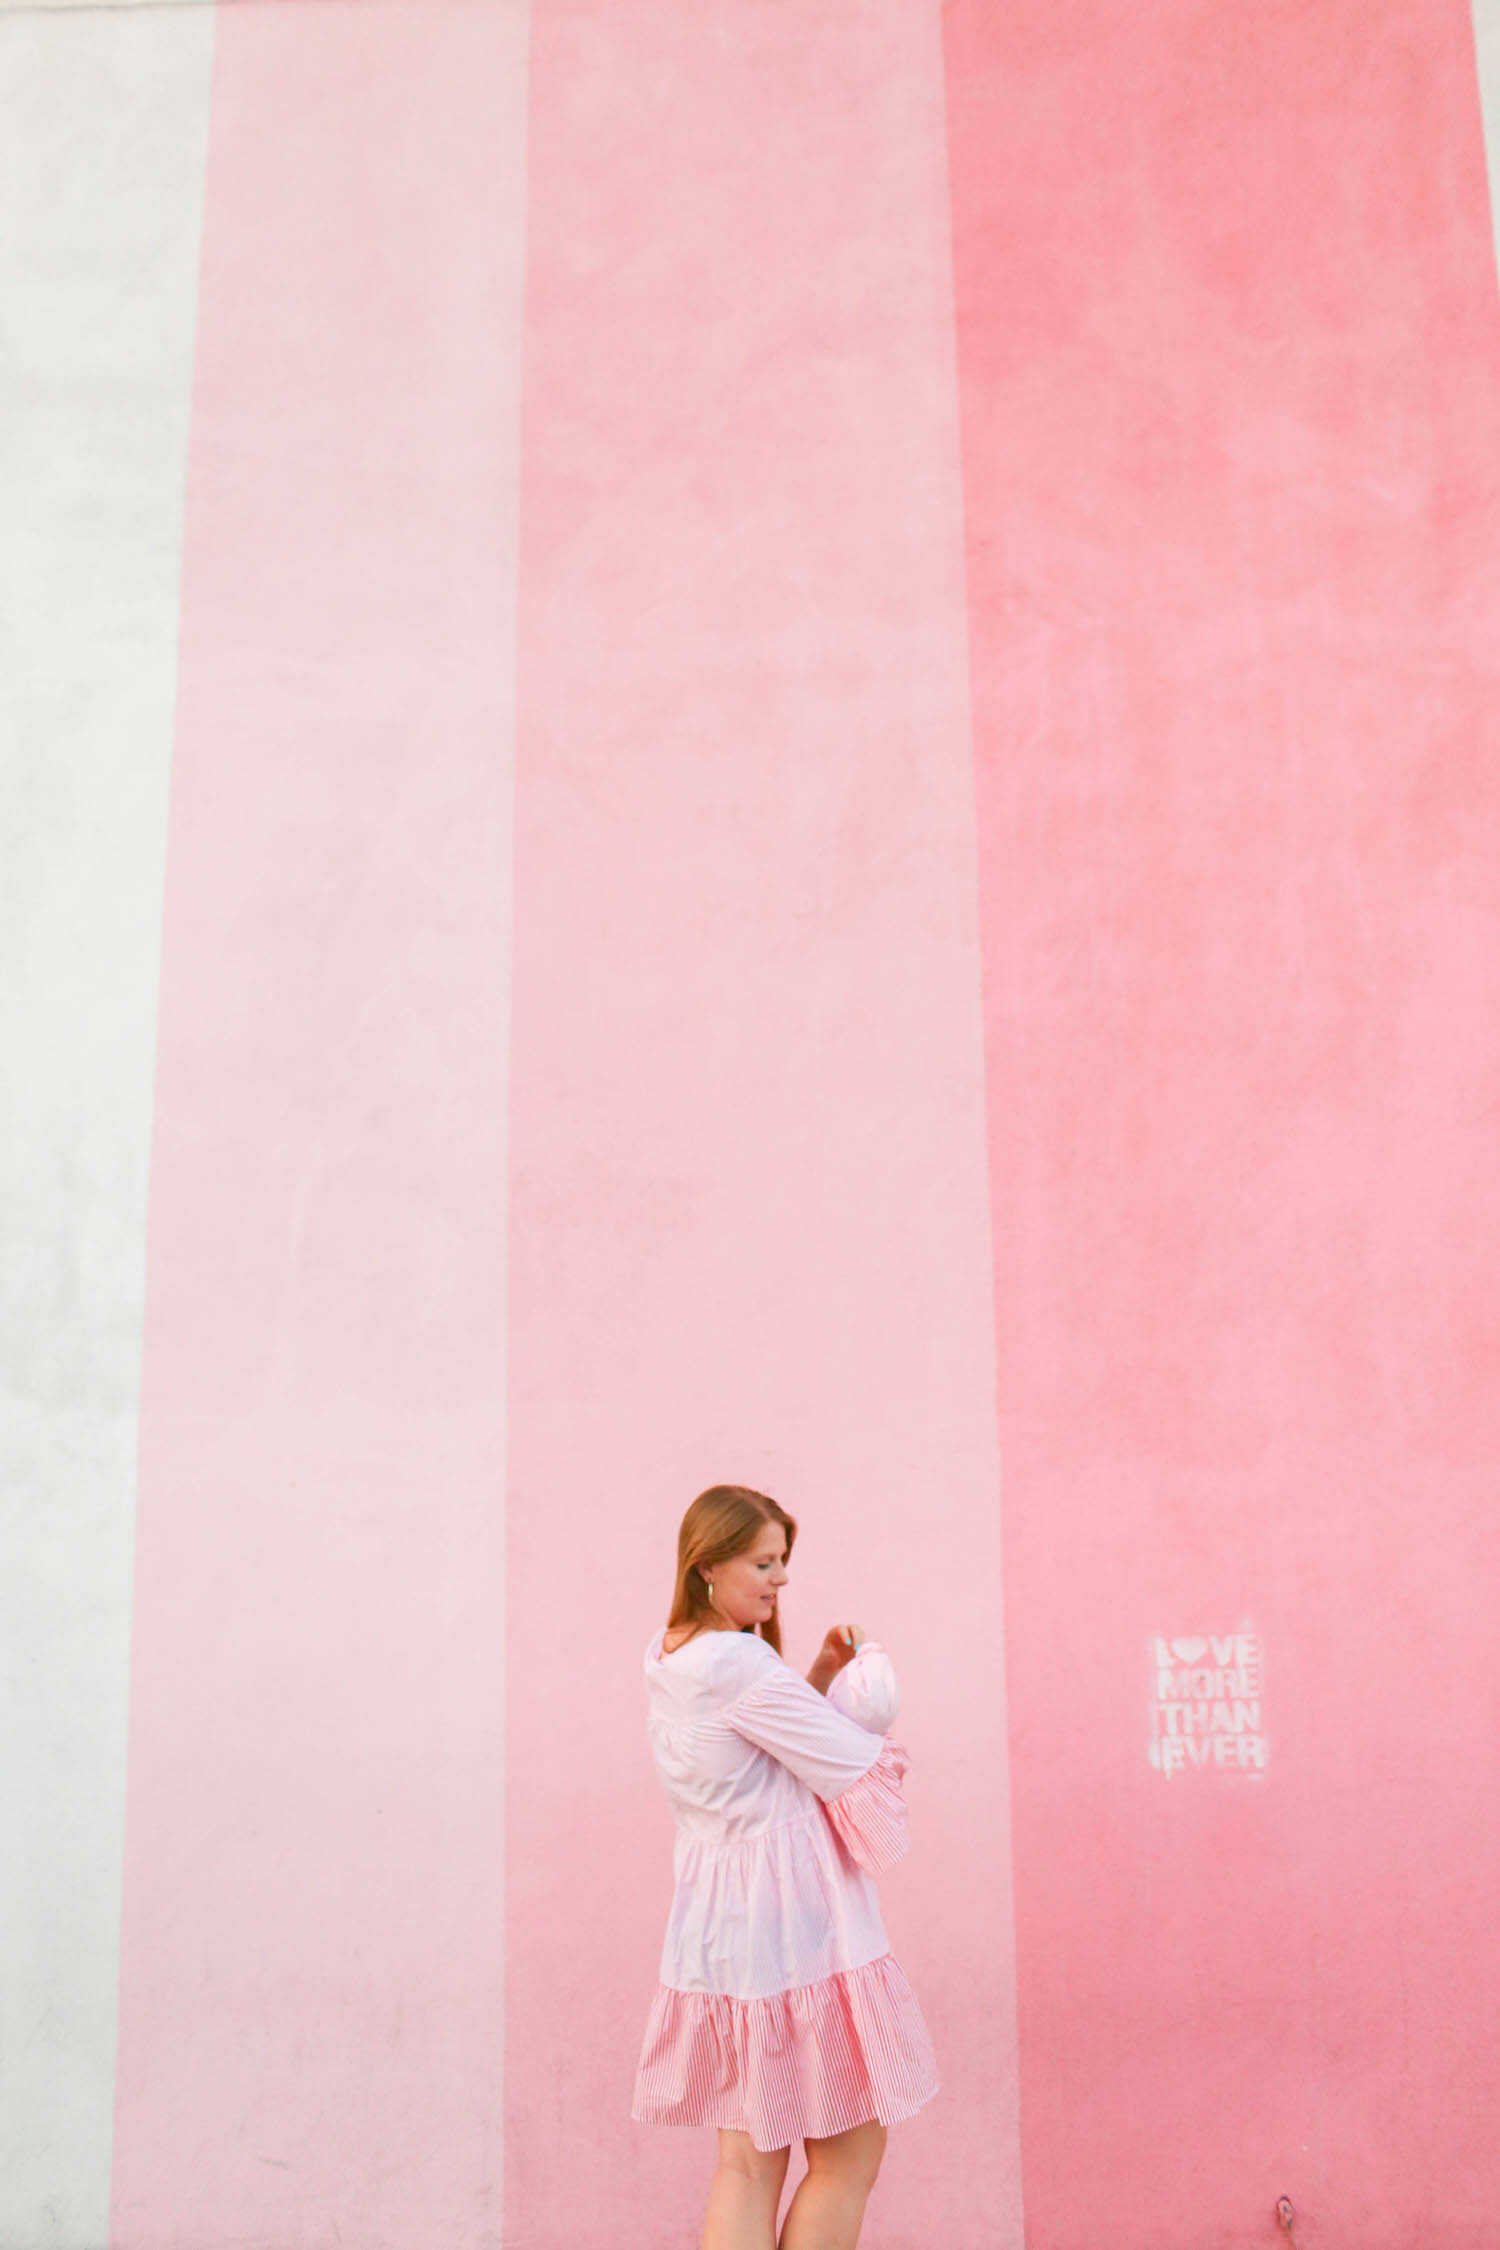 Beautiful Places in San Diego to Take Family Pictures - Pigment’s Pink Wall in North Park.